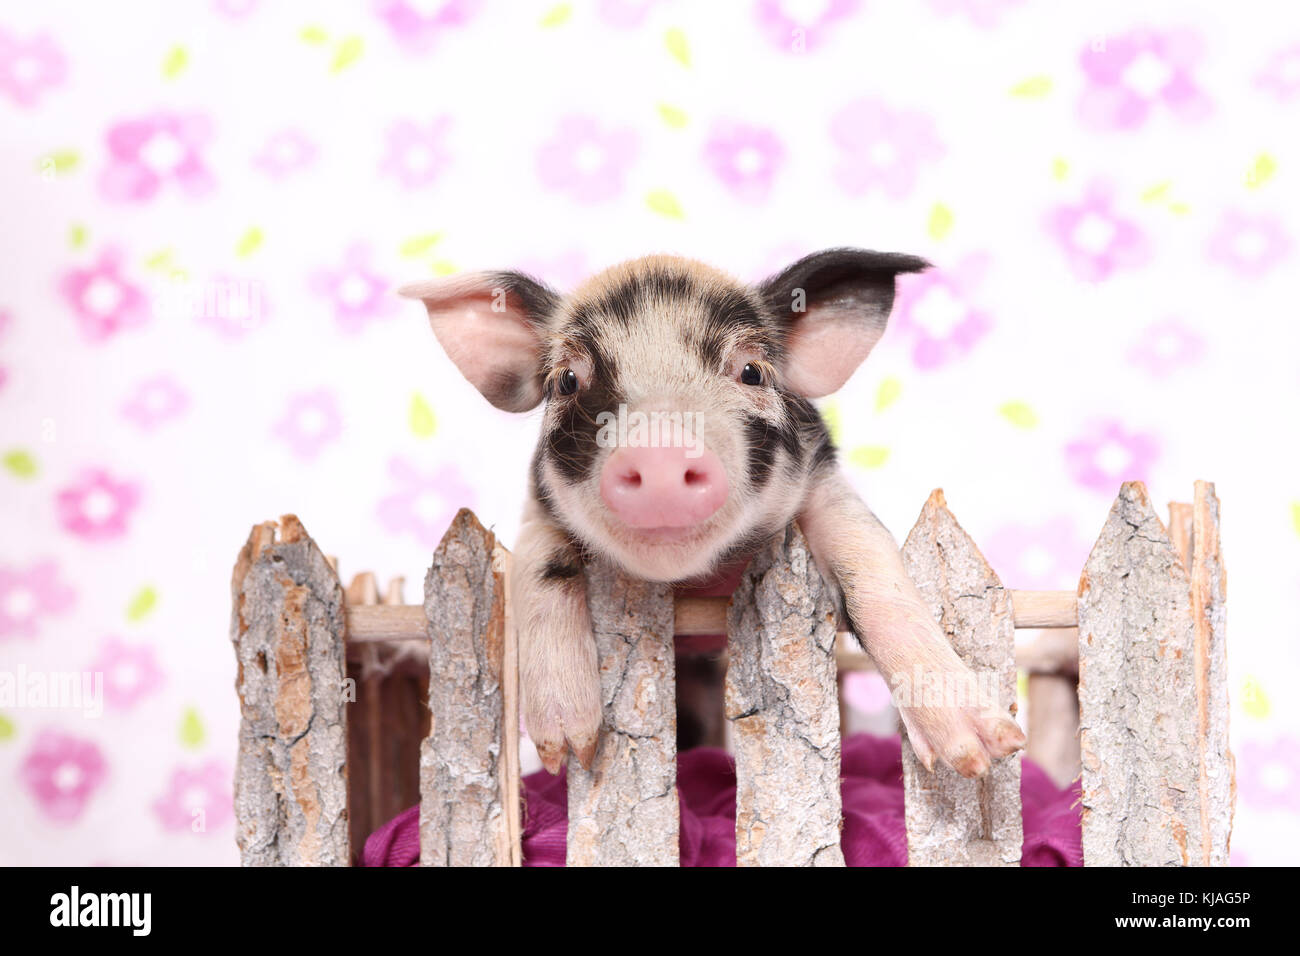 Domestic Pig, Turopolje x ?. Piglet in a small enclosure. Studio picture seen against a white background with flower print. Germany Stock Photo